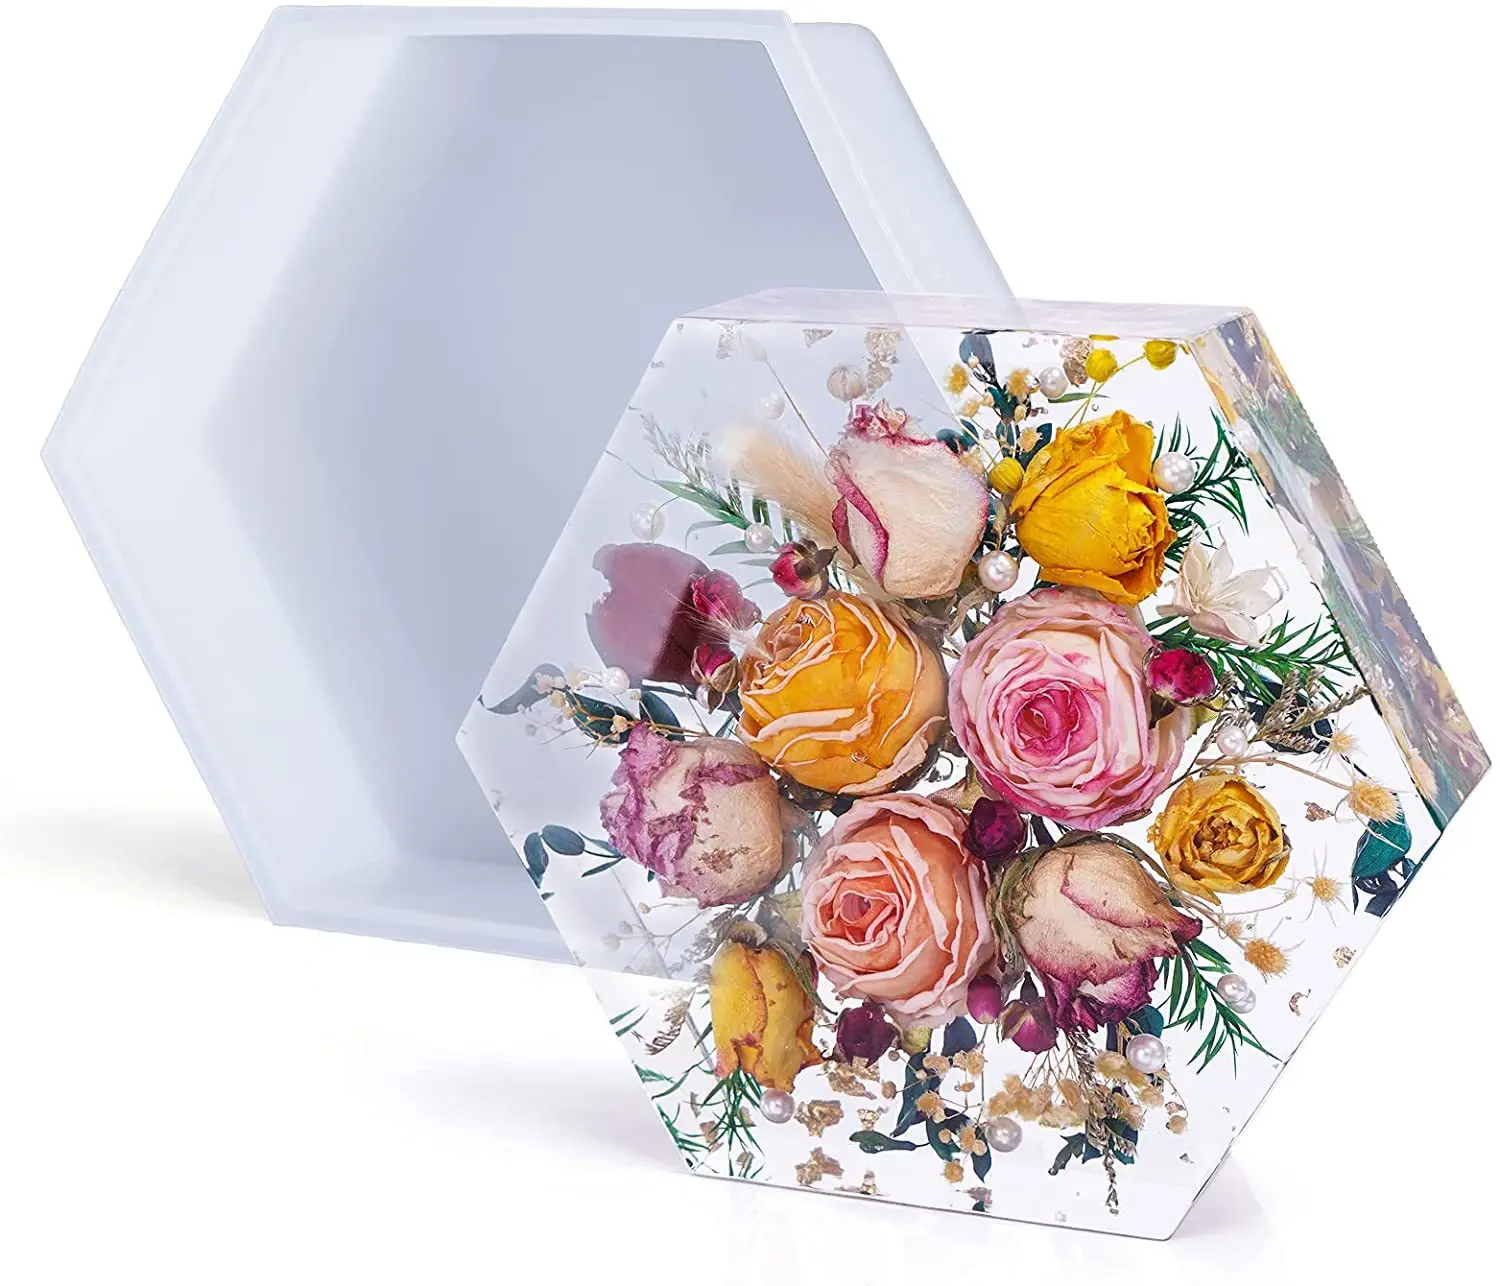 

Large Epoxy Resin Molds Silicone Hexagon diy casting Mold for Resin Wedding Gift Dry Flowers Preservation